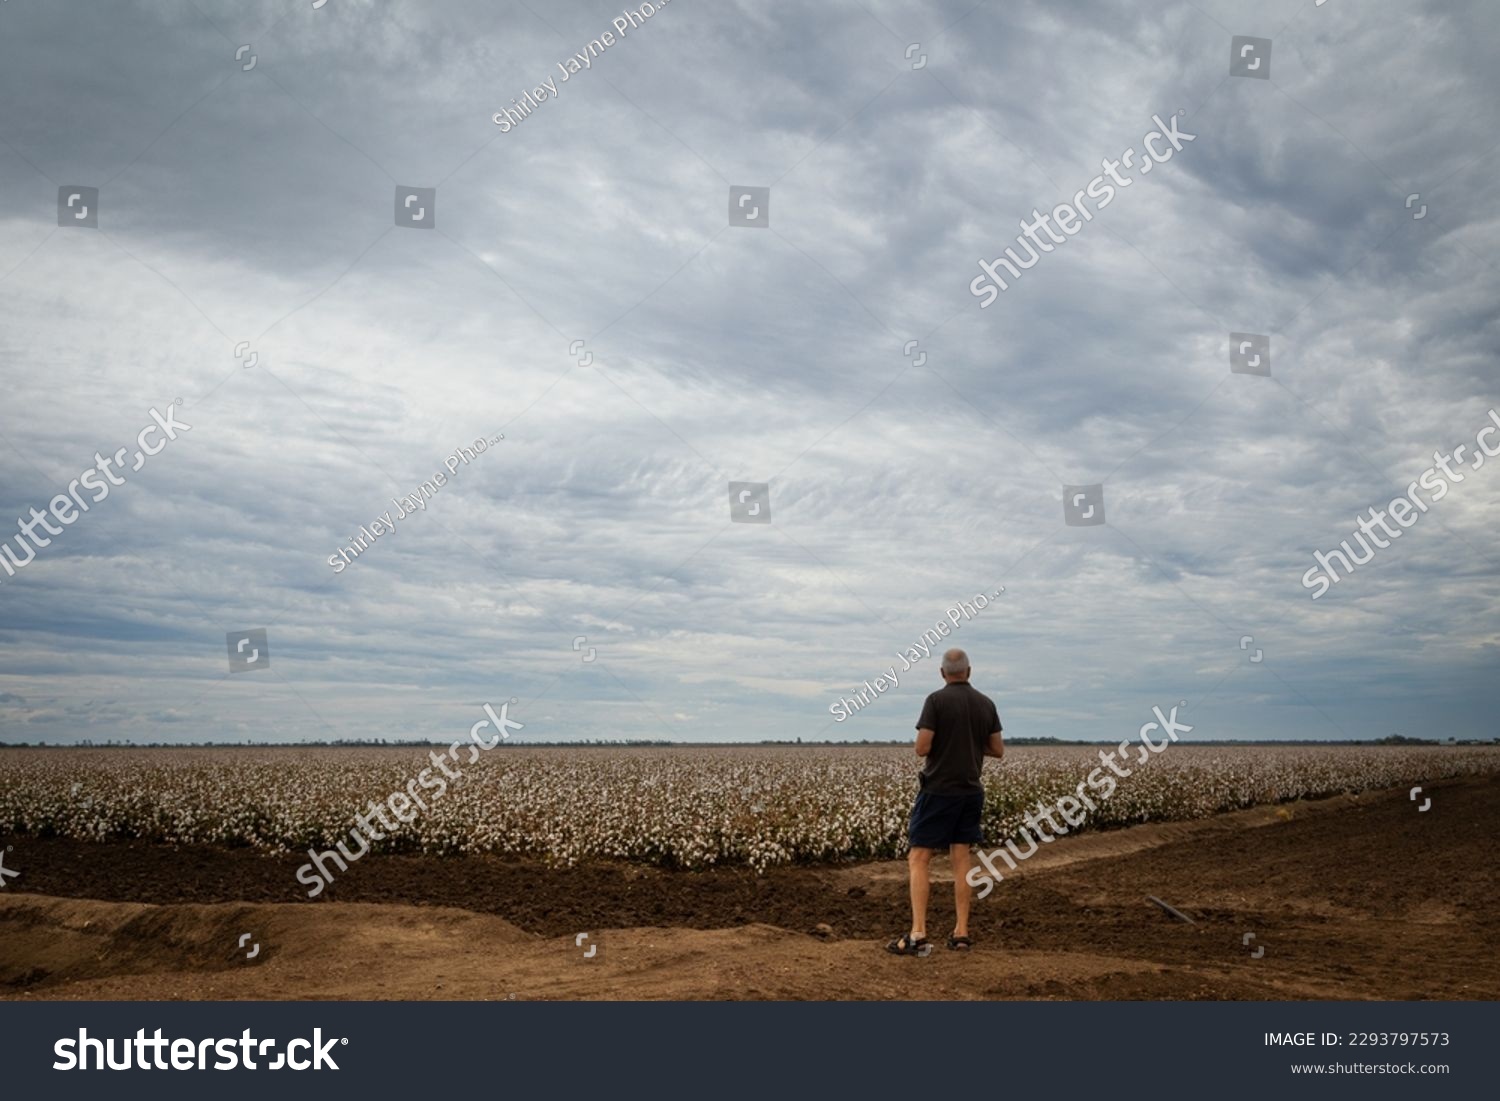 Man looking at cotton field under an overcast sky in the Australian Outback #2293797573